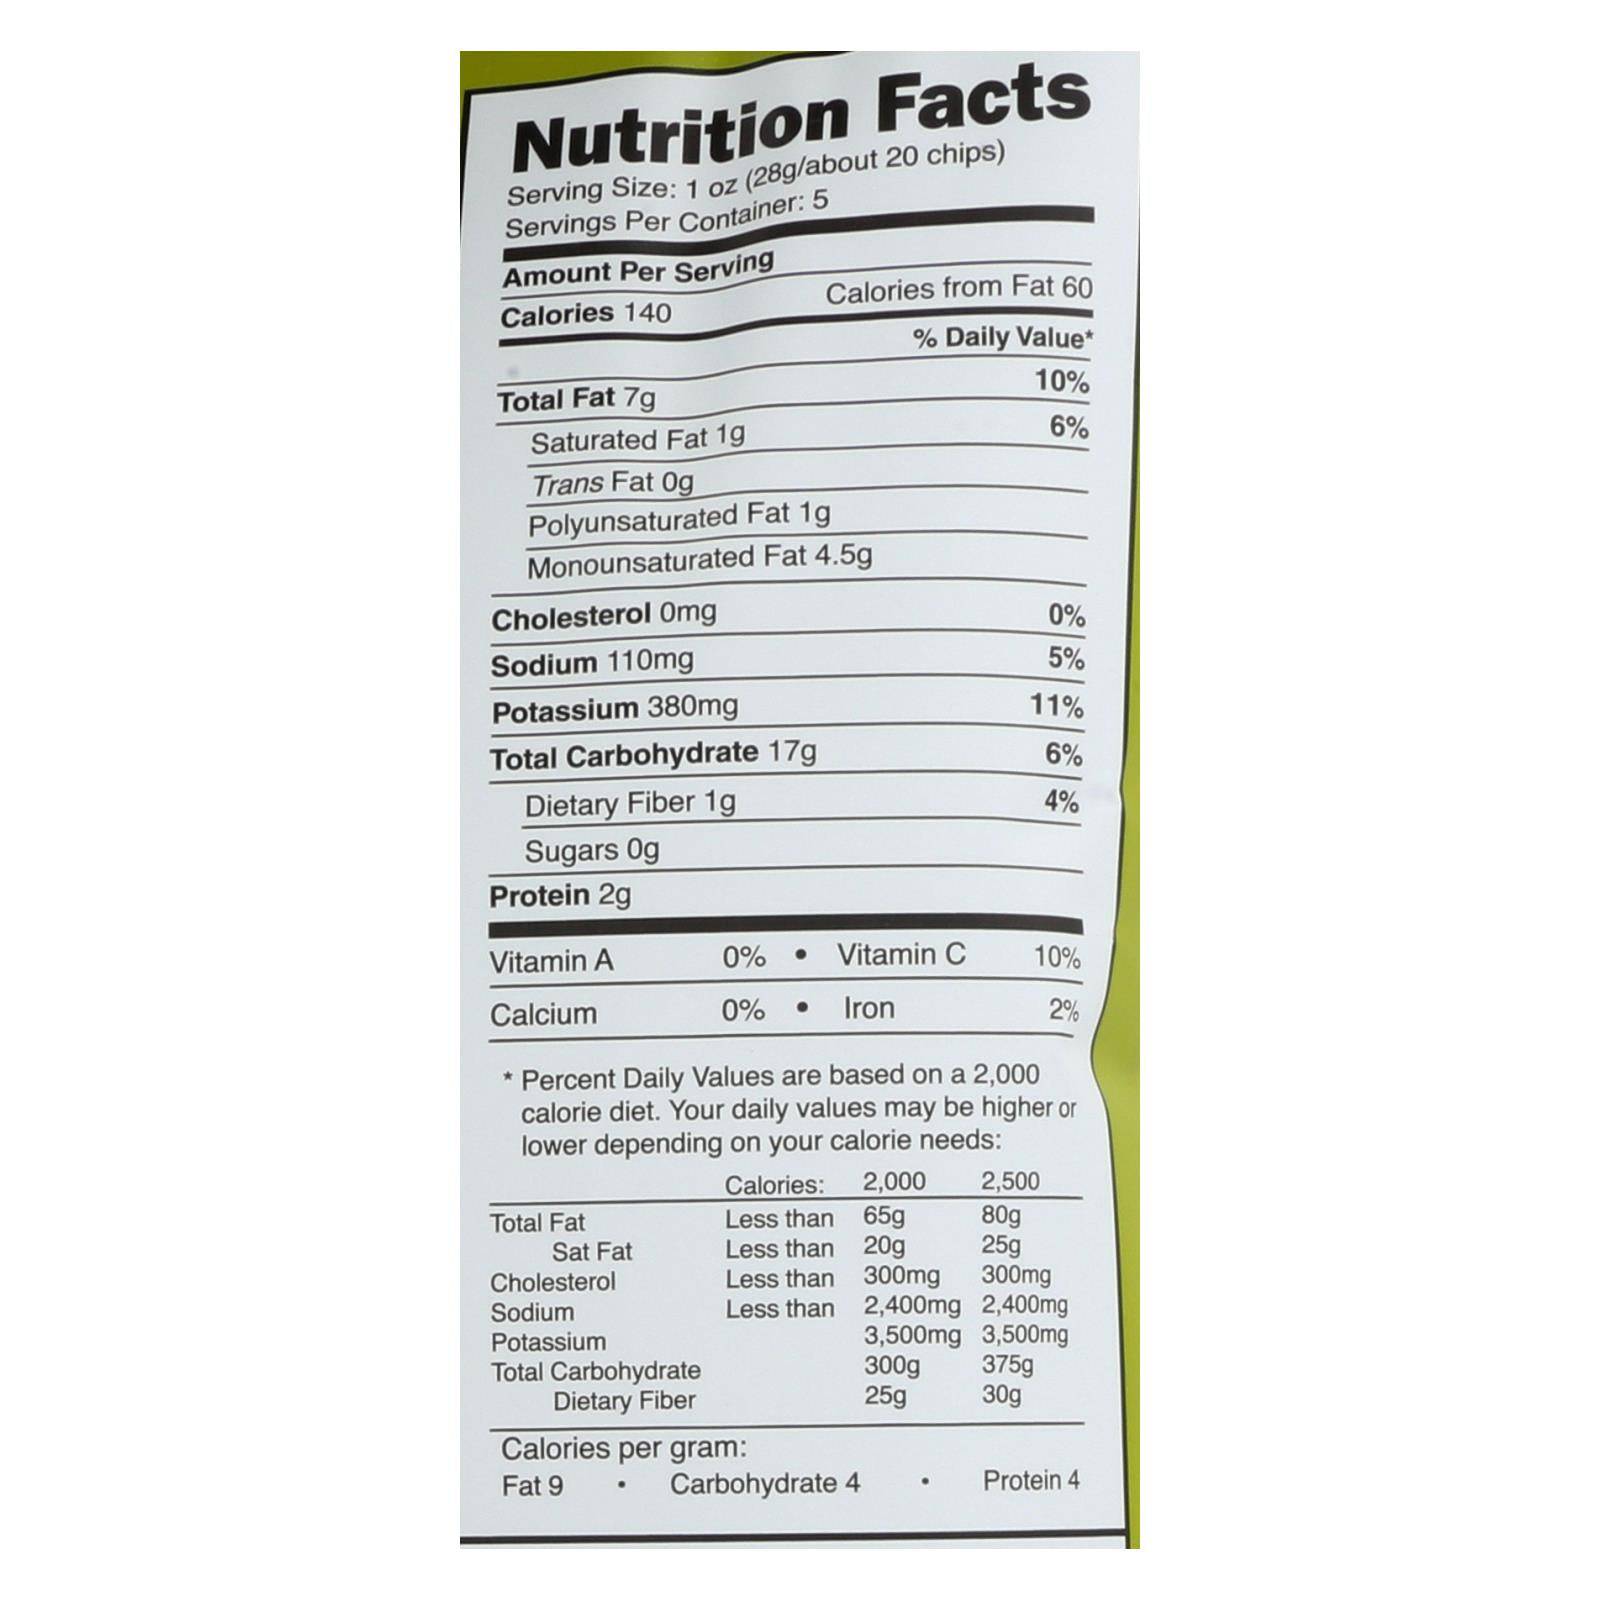 Good Health Kettle Chips - Avocado Oil Lime Ranch - Case Of 12 - 5 Oz. | OnlyNaturals.us